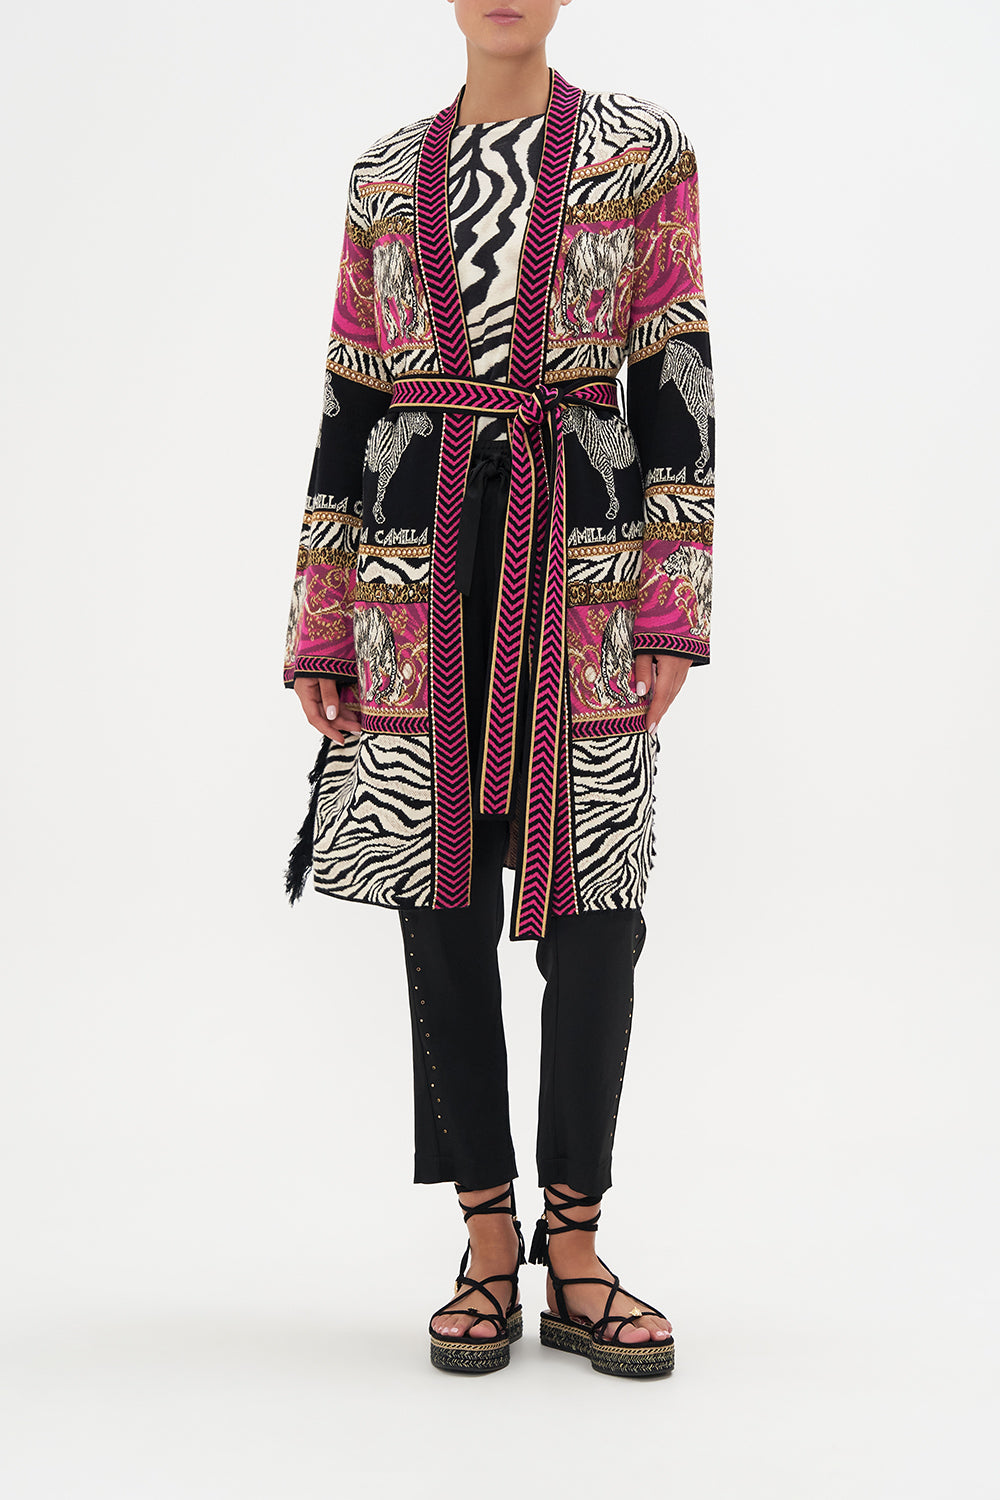 KNIT JACQUARD JACKET WITH FRINGING EARN YOUR STRIPES